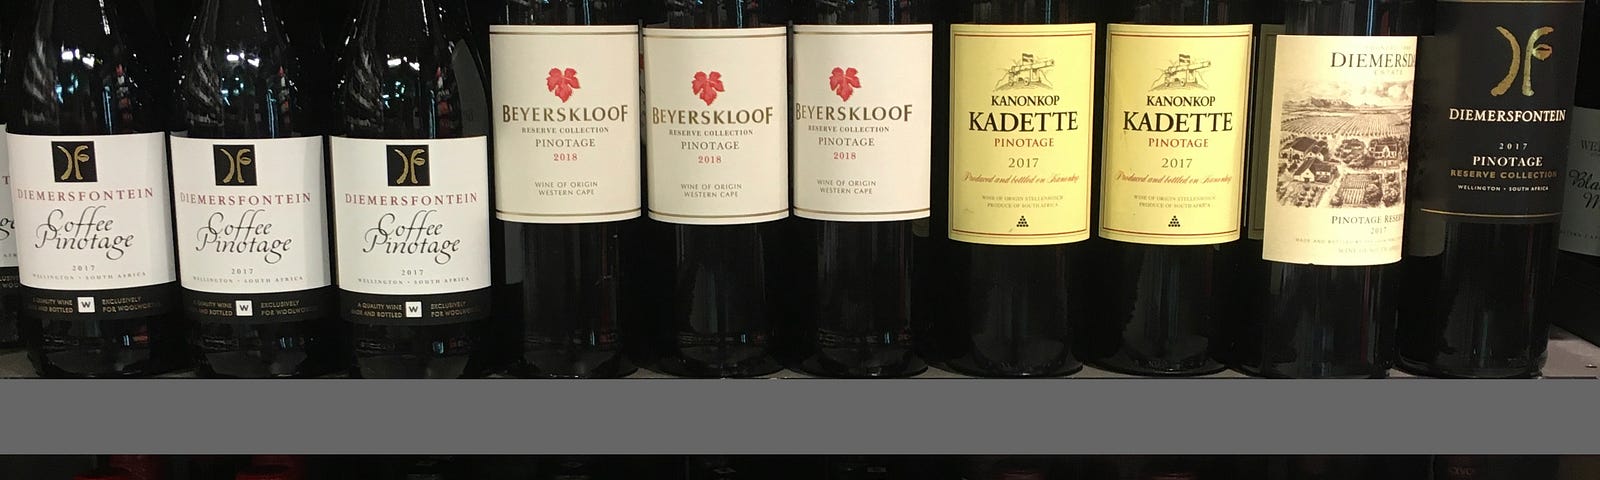 Display of Pinotage wine from a supermarket